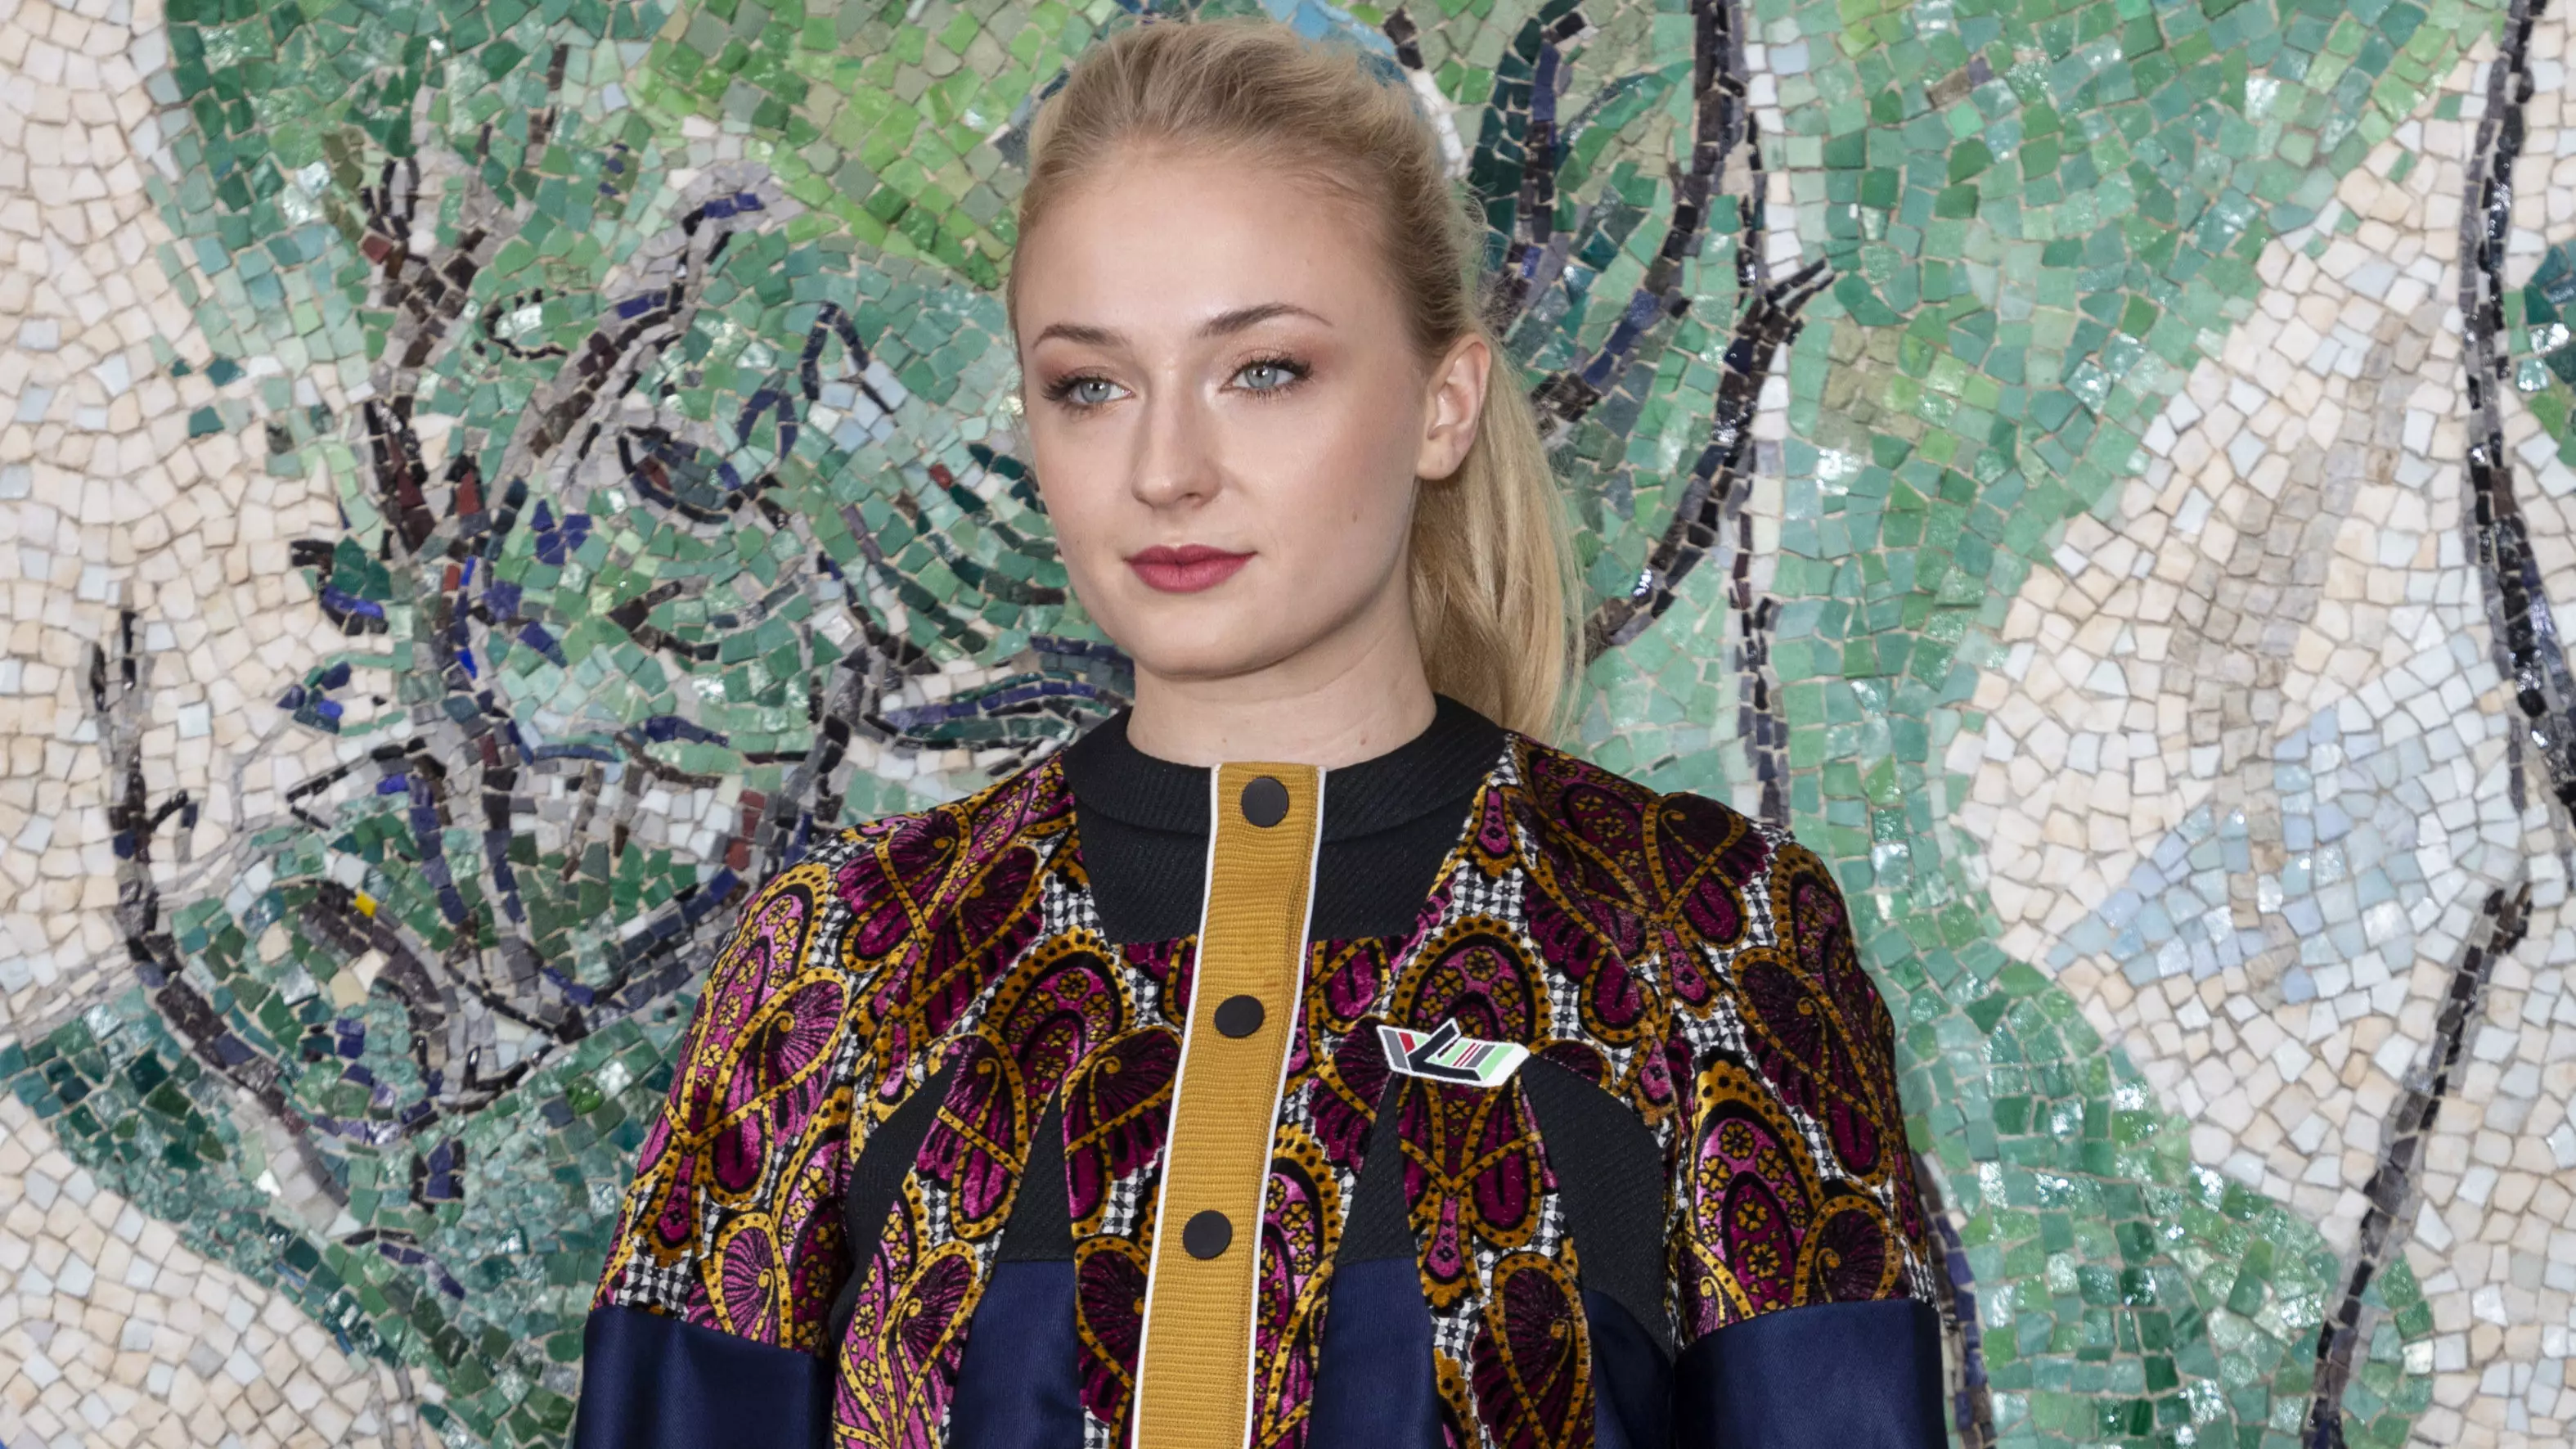 Sophie Turner's New Tattoo Could Be A 'Game Of Thrones' Spoiler